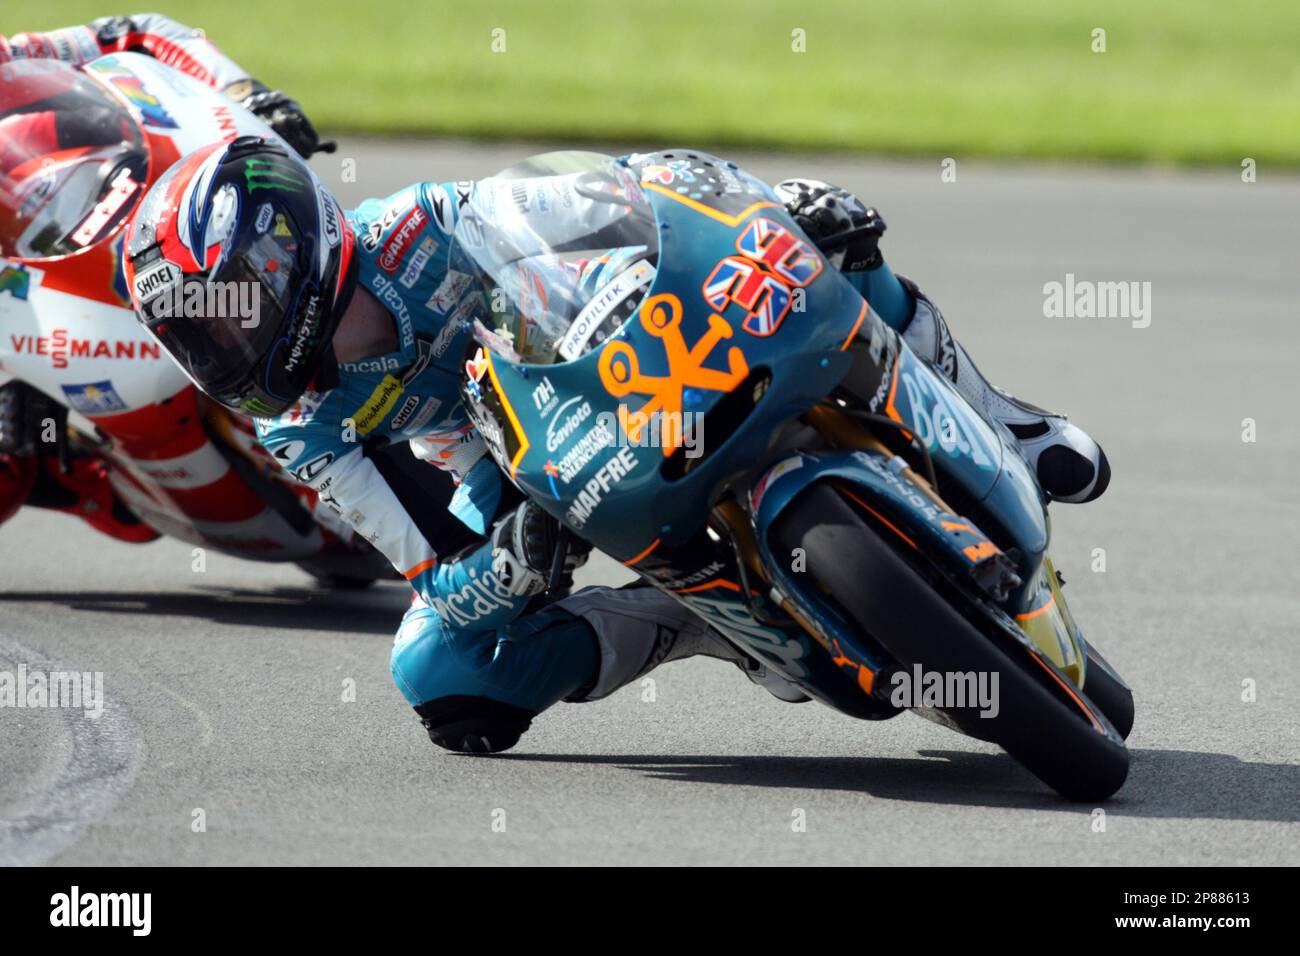 Bancaja Aspar Team's MotoGP rider Bradley Smith takes the Melbourne loop  during practice at the British Motorcycle Grand Prix at the Donington  Circuit, in Donington, England, Saturday July 25, 2009. (AP Photo/Tom